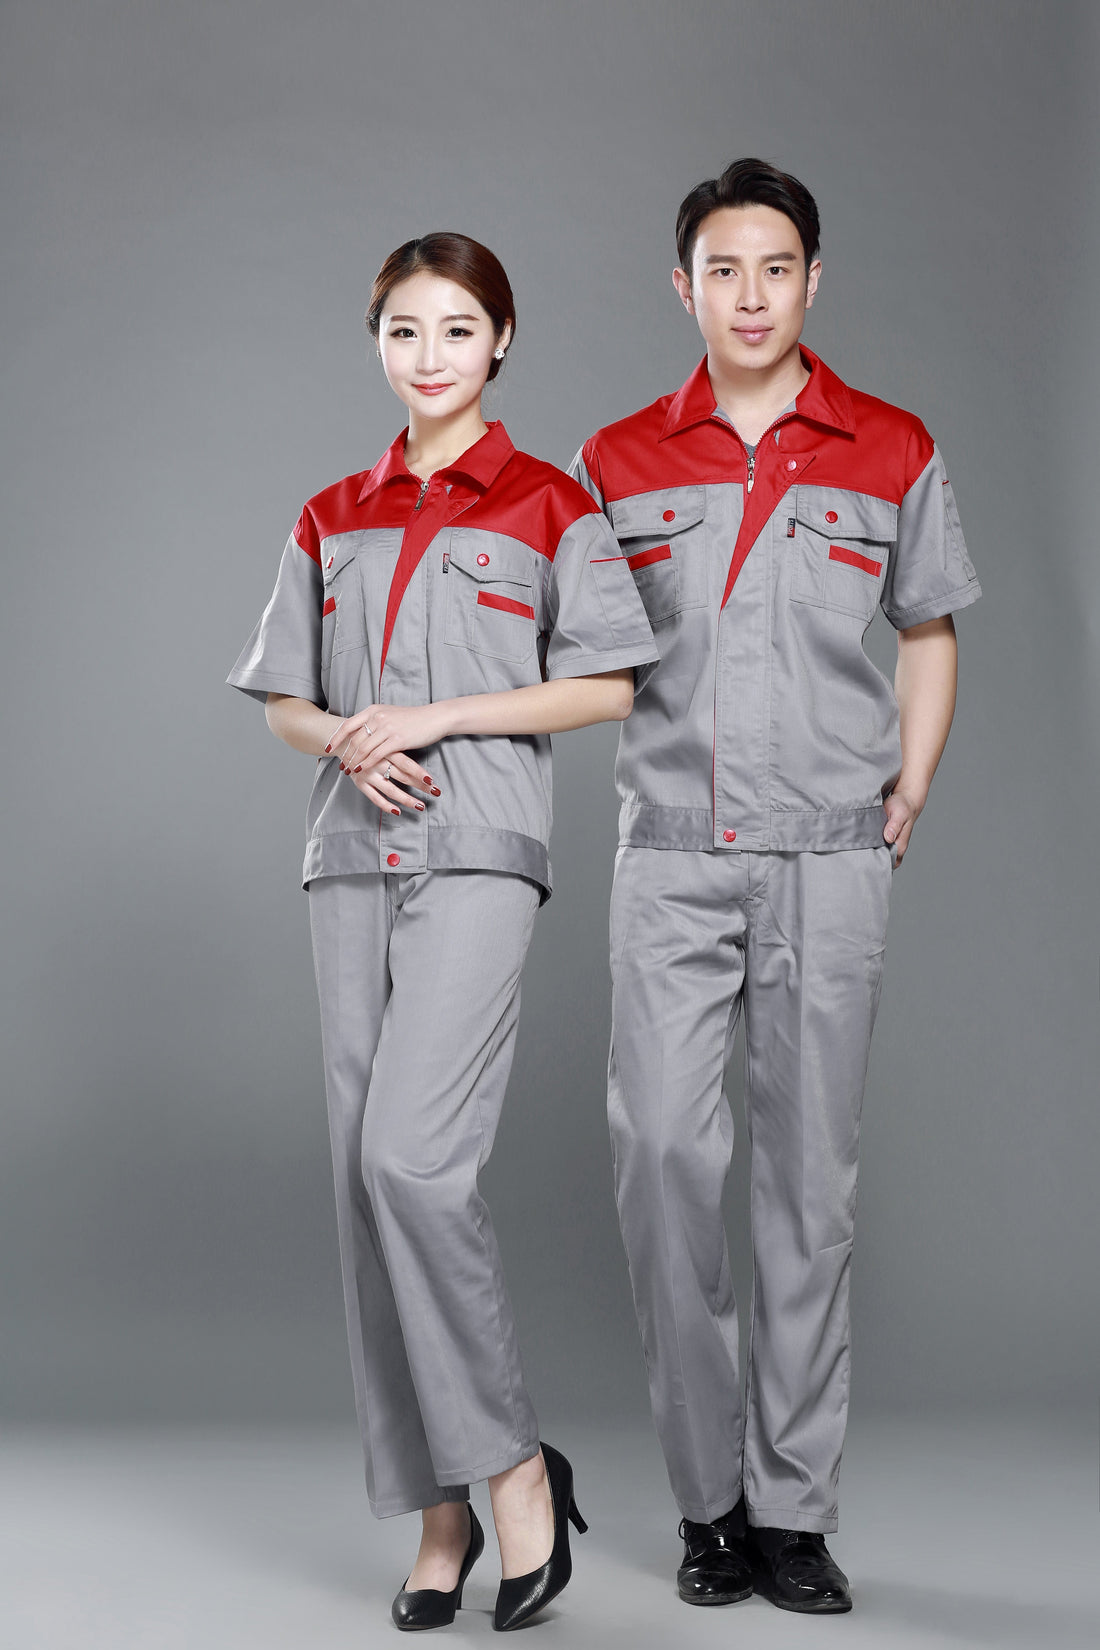 Corals Trading Co. 可樂思百貨商行 涤棉 Short-sleeved polyester cotton overalls for summer SD-S2409